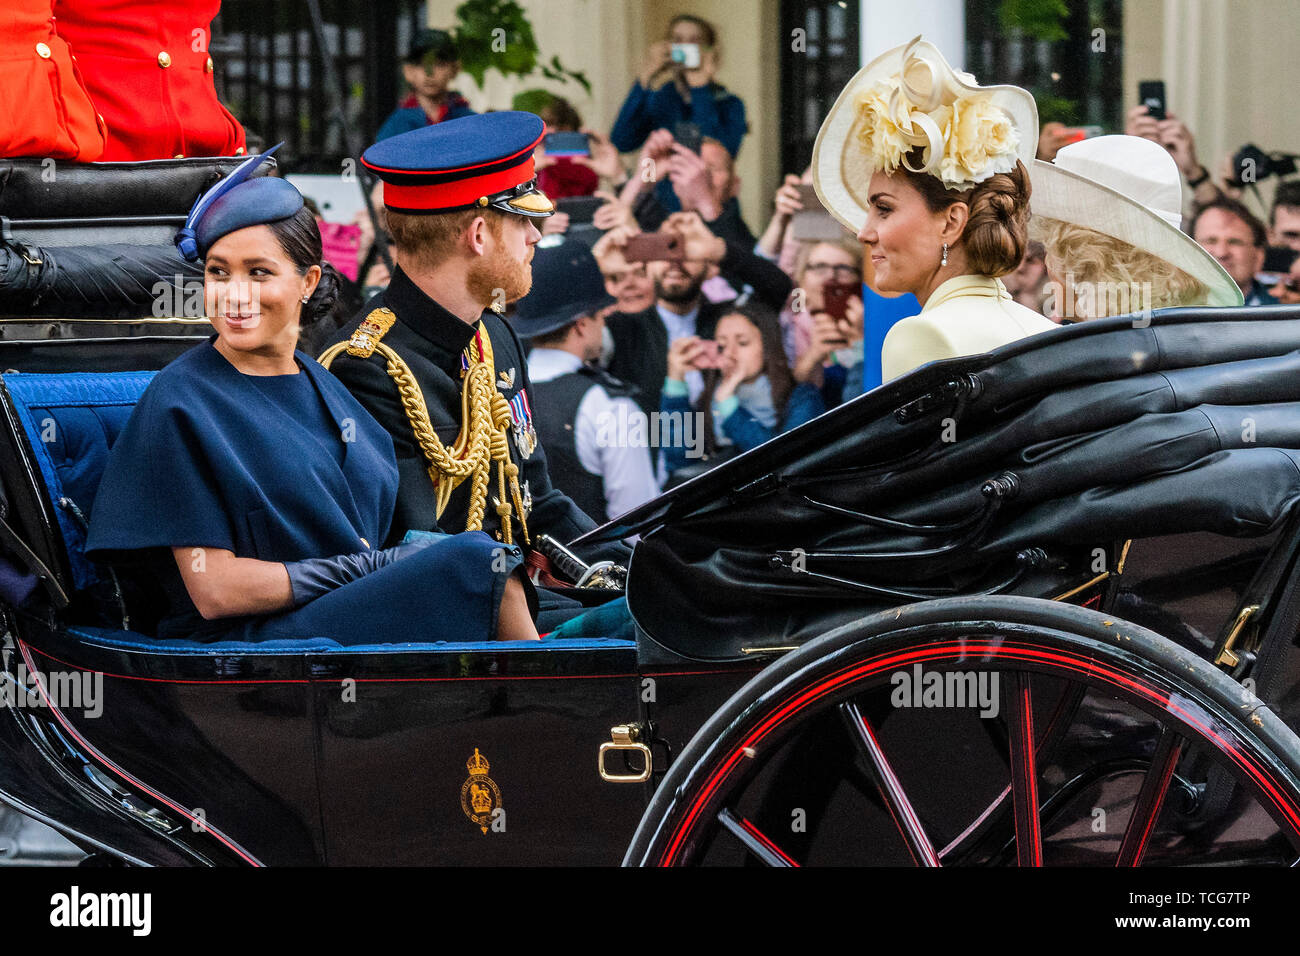 London, UK. 08th June, 2019. The Duke and Duchess of Sussex -  Duchess of Cornwall, The Duchess of Cambridge - The Queen’s Birthday Parade, more popularly known as Trooping the Colour.This year the Regiment “trooping” its Colour (ceremonial Regimental flag) was the 1st Battalion Grenadier Guards. Credit: Guy Bell/Alamy Live News Stock Photo